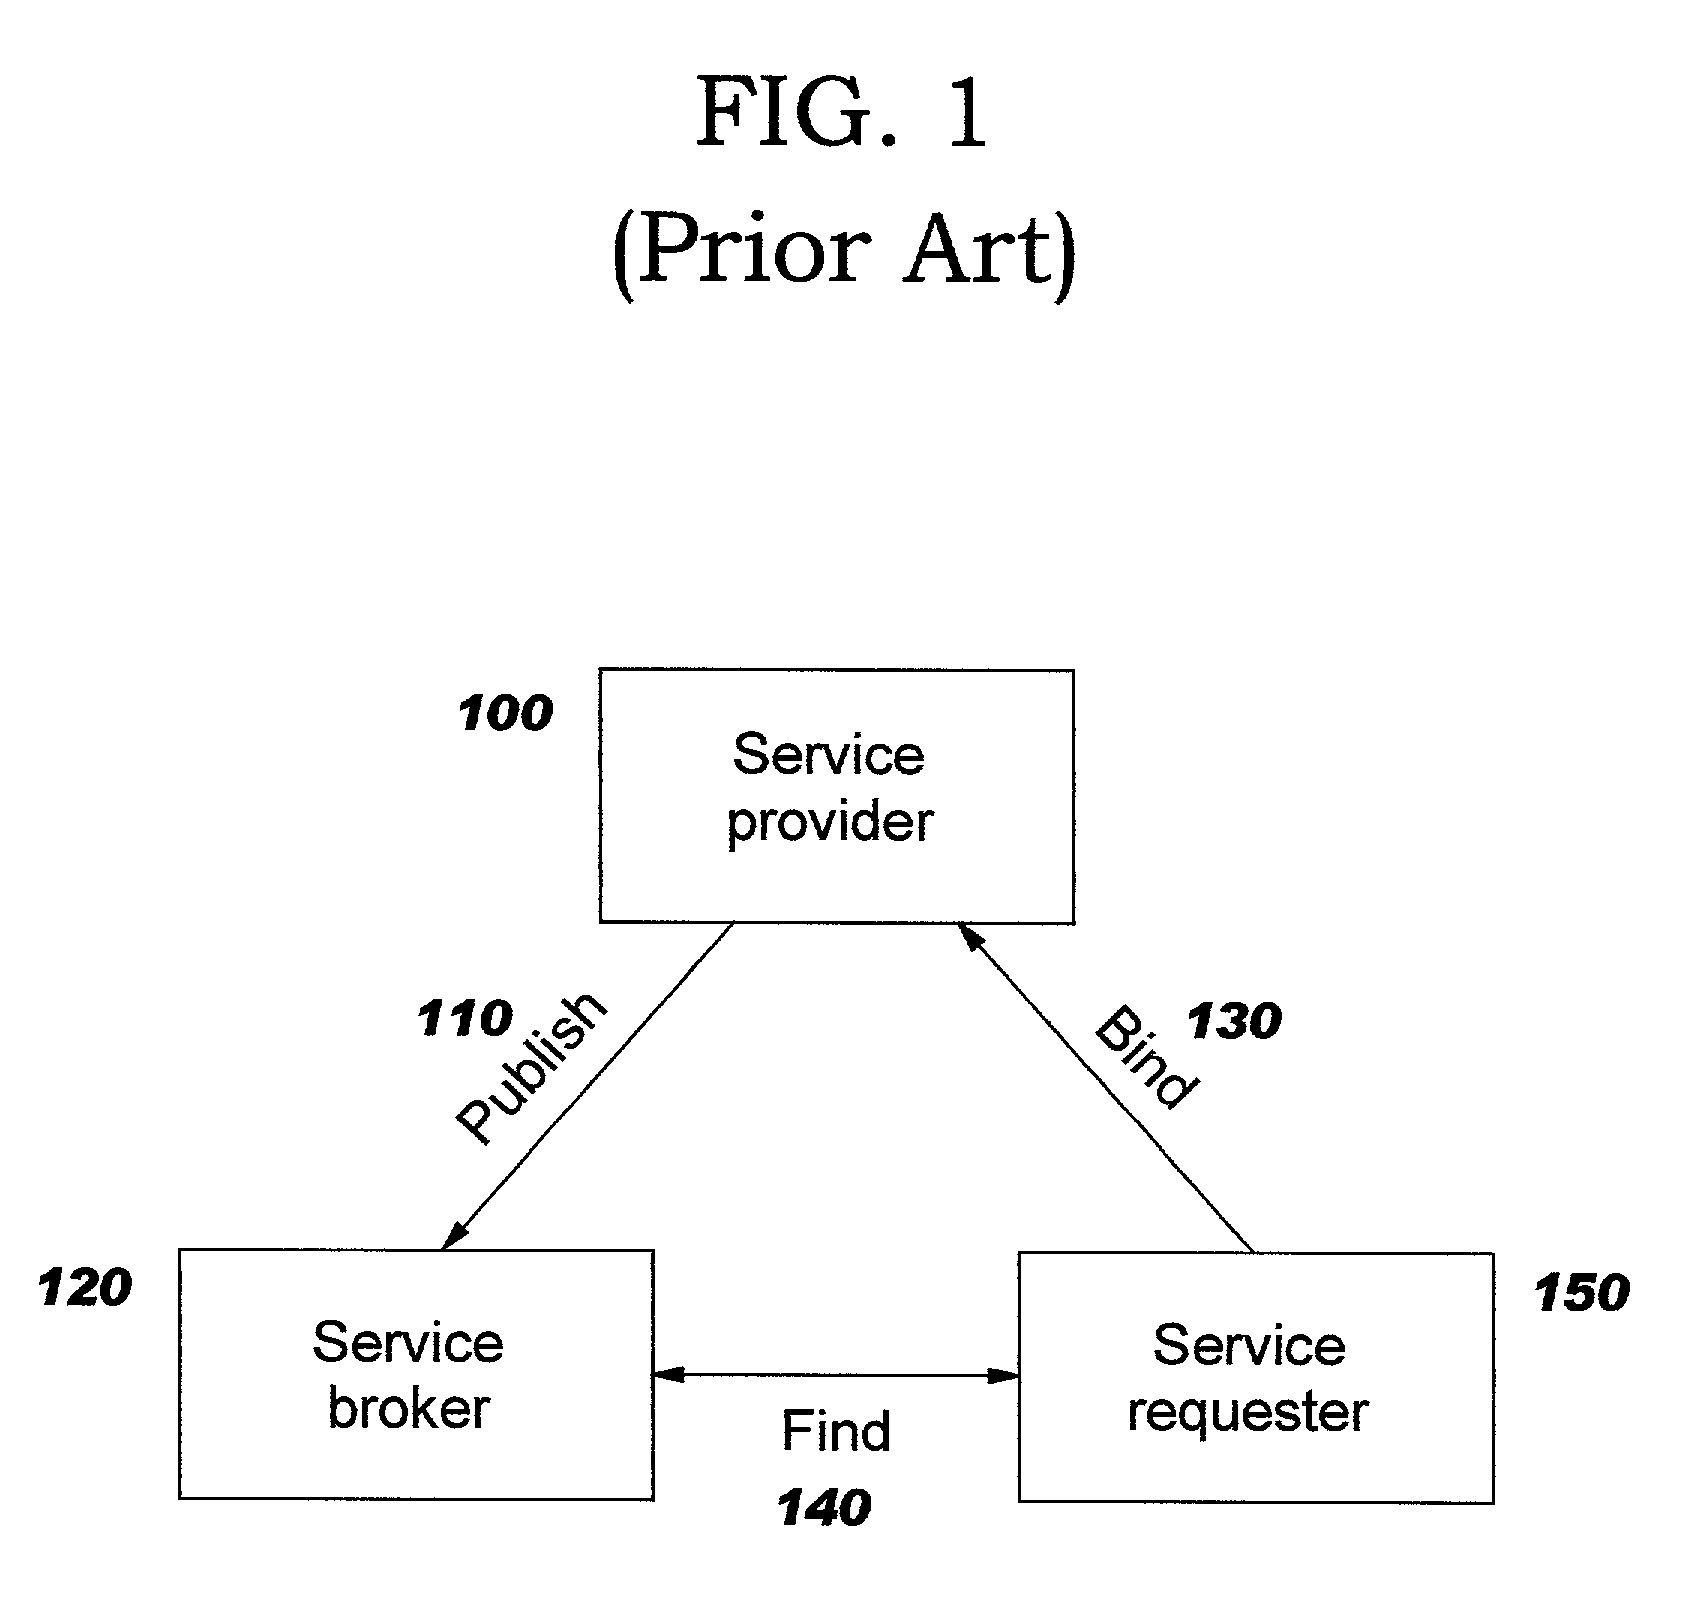 Provisioning aggregated services in a distributed computing environment